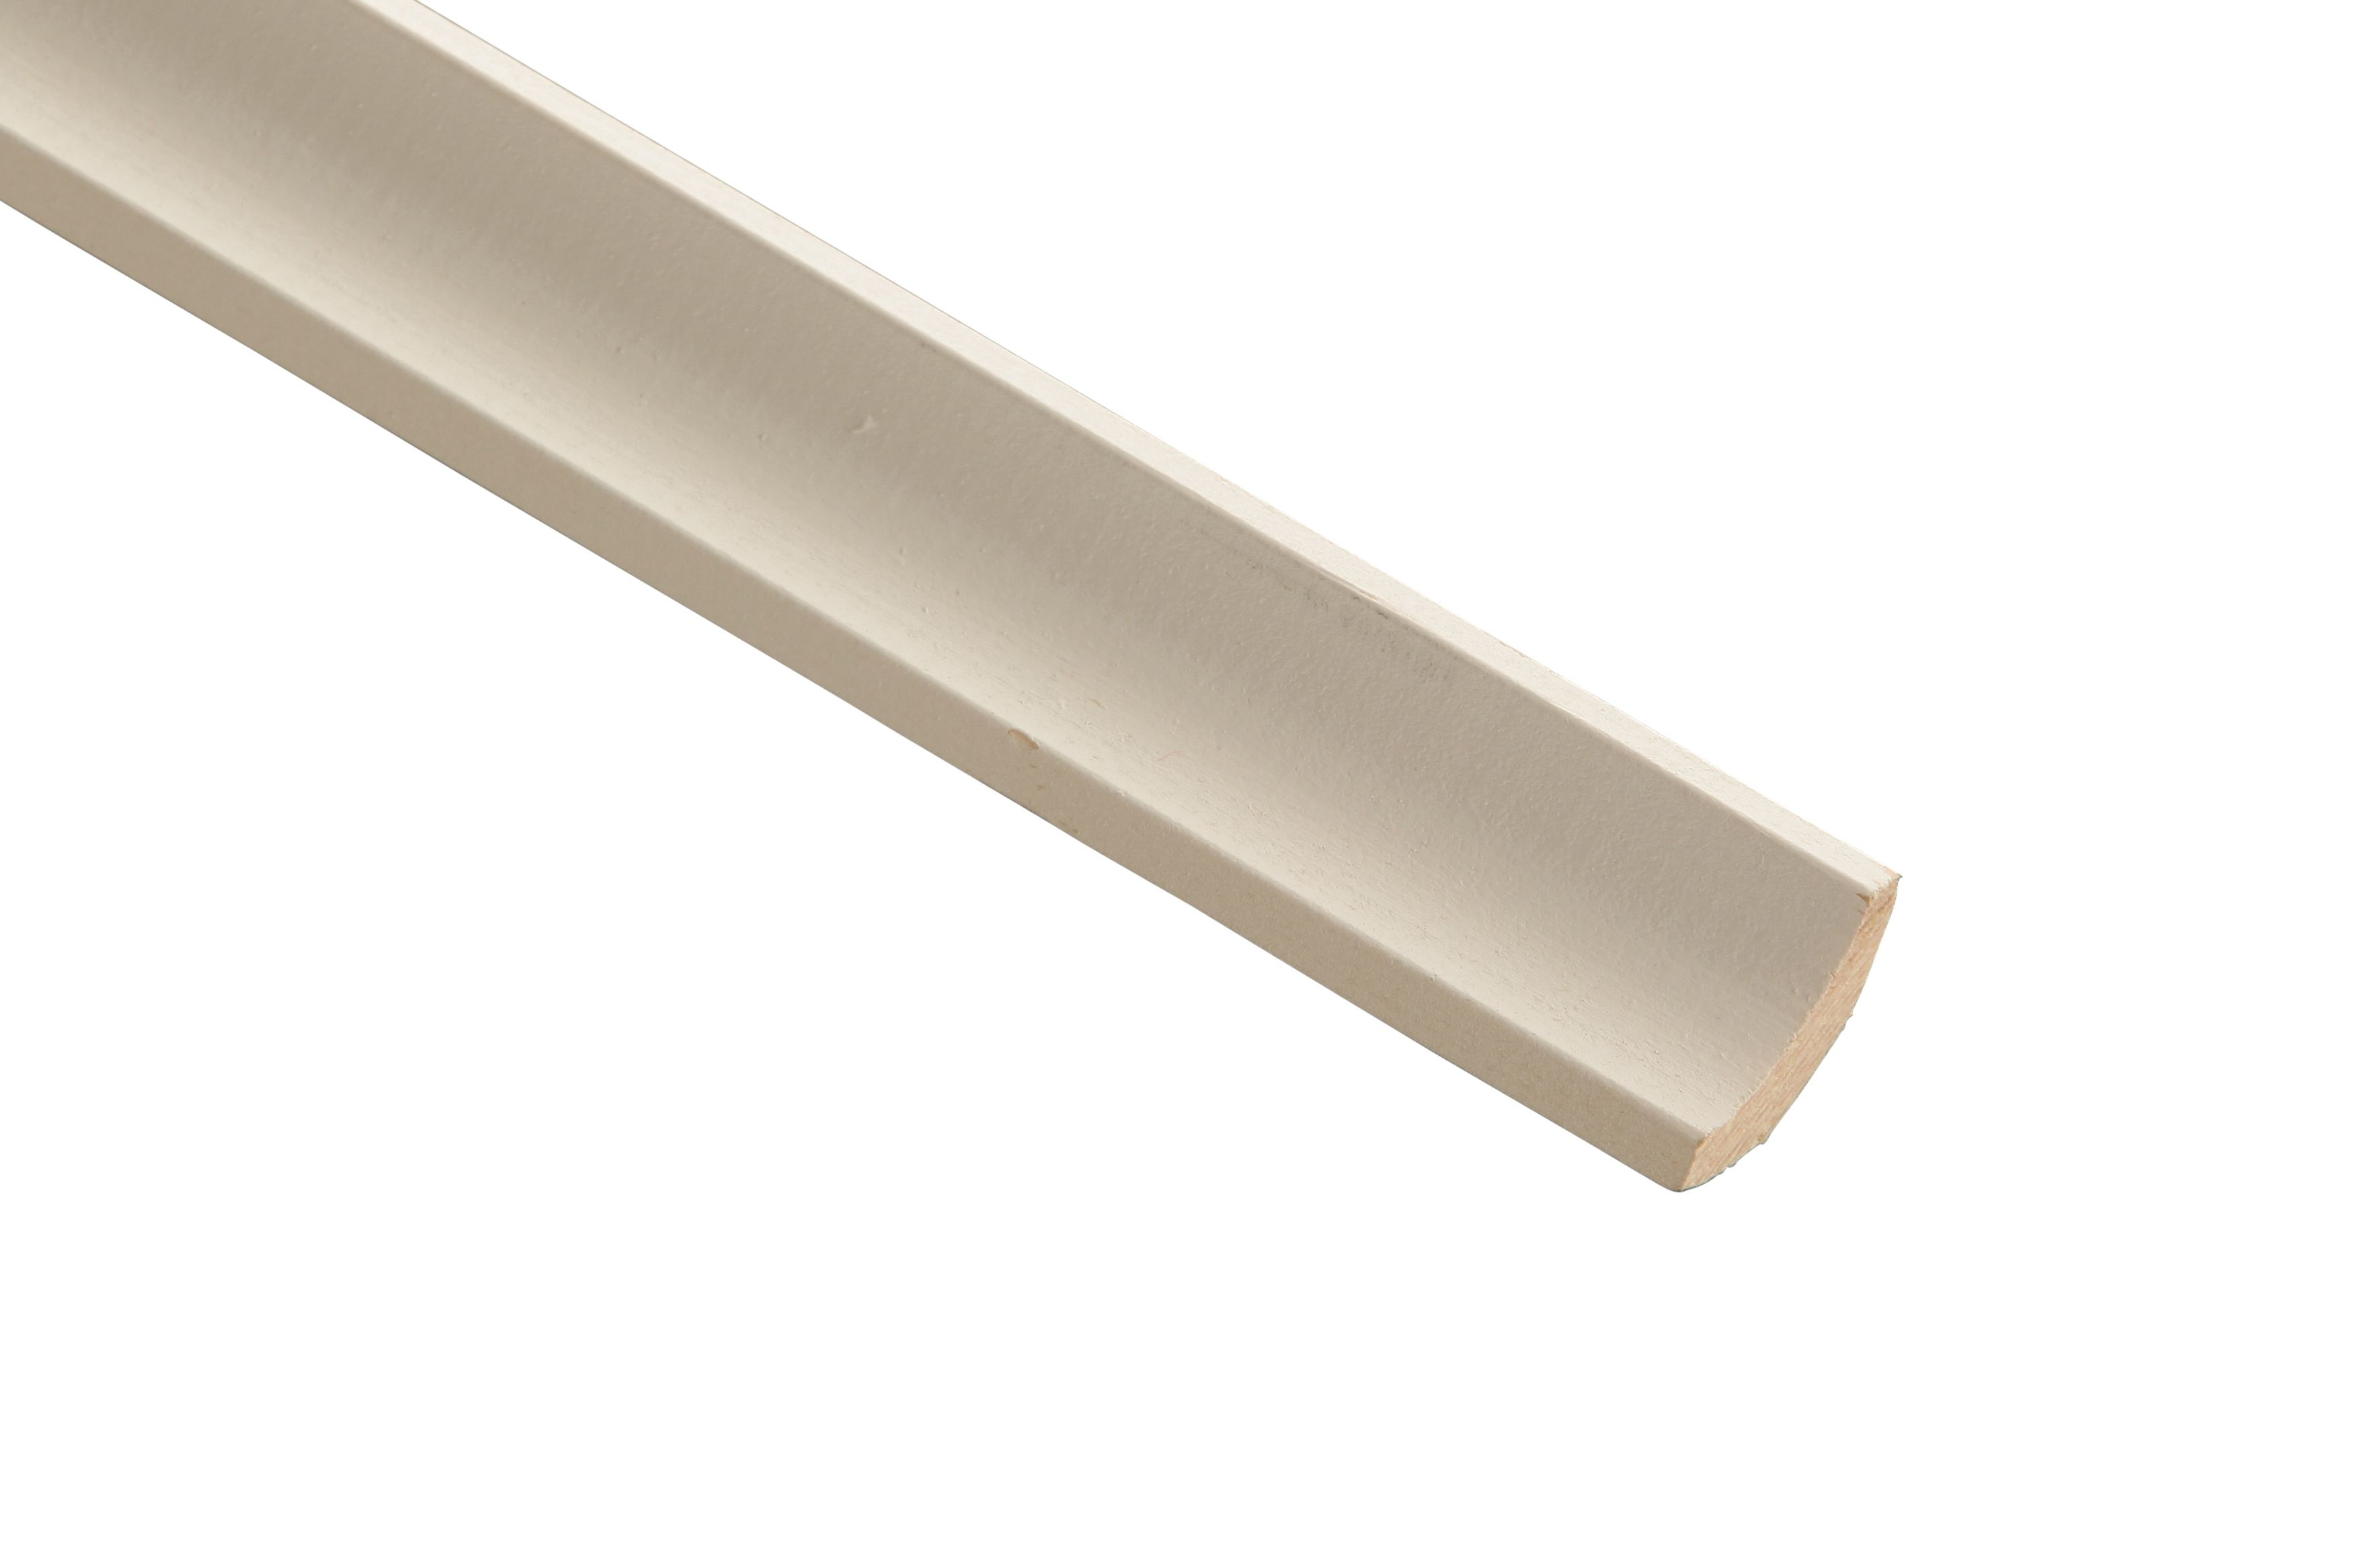 Wickes Primed Coving Moulding - 20 x 20 x 2400mm